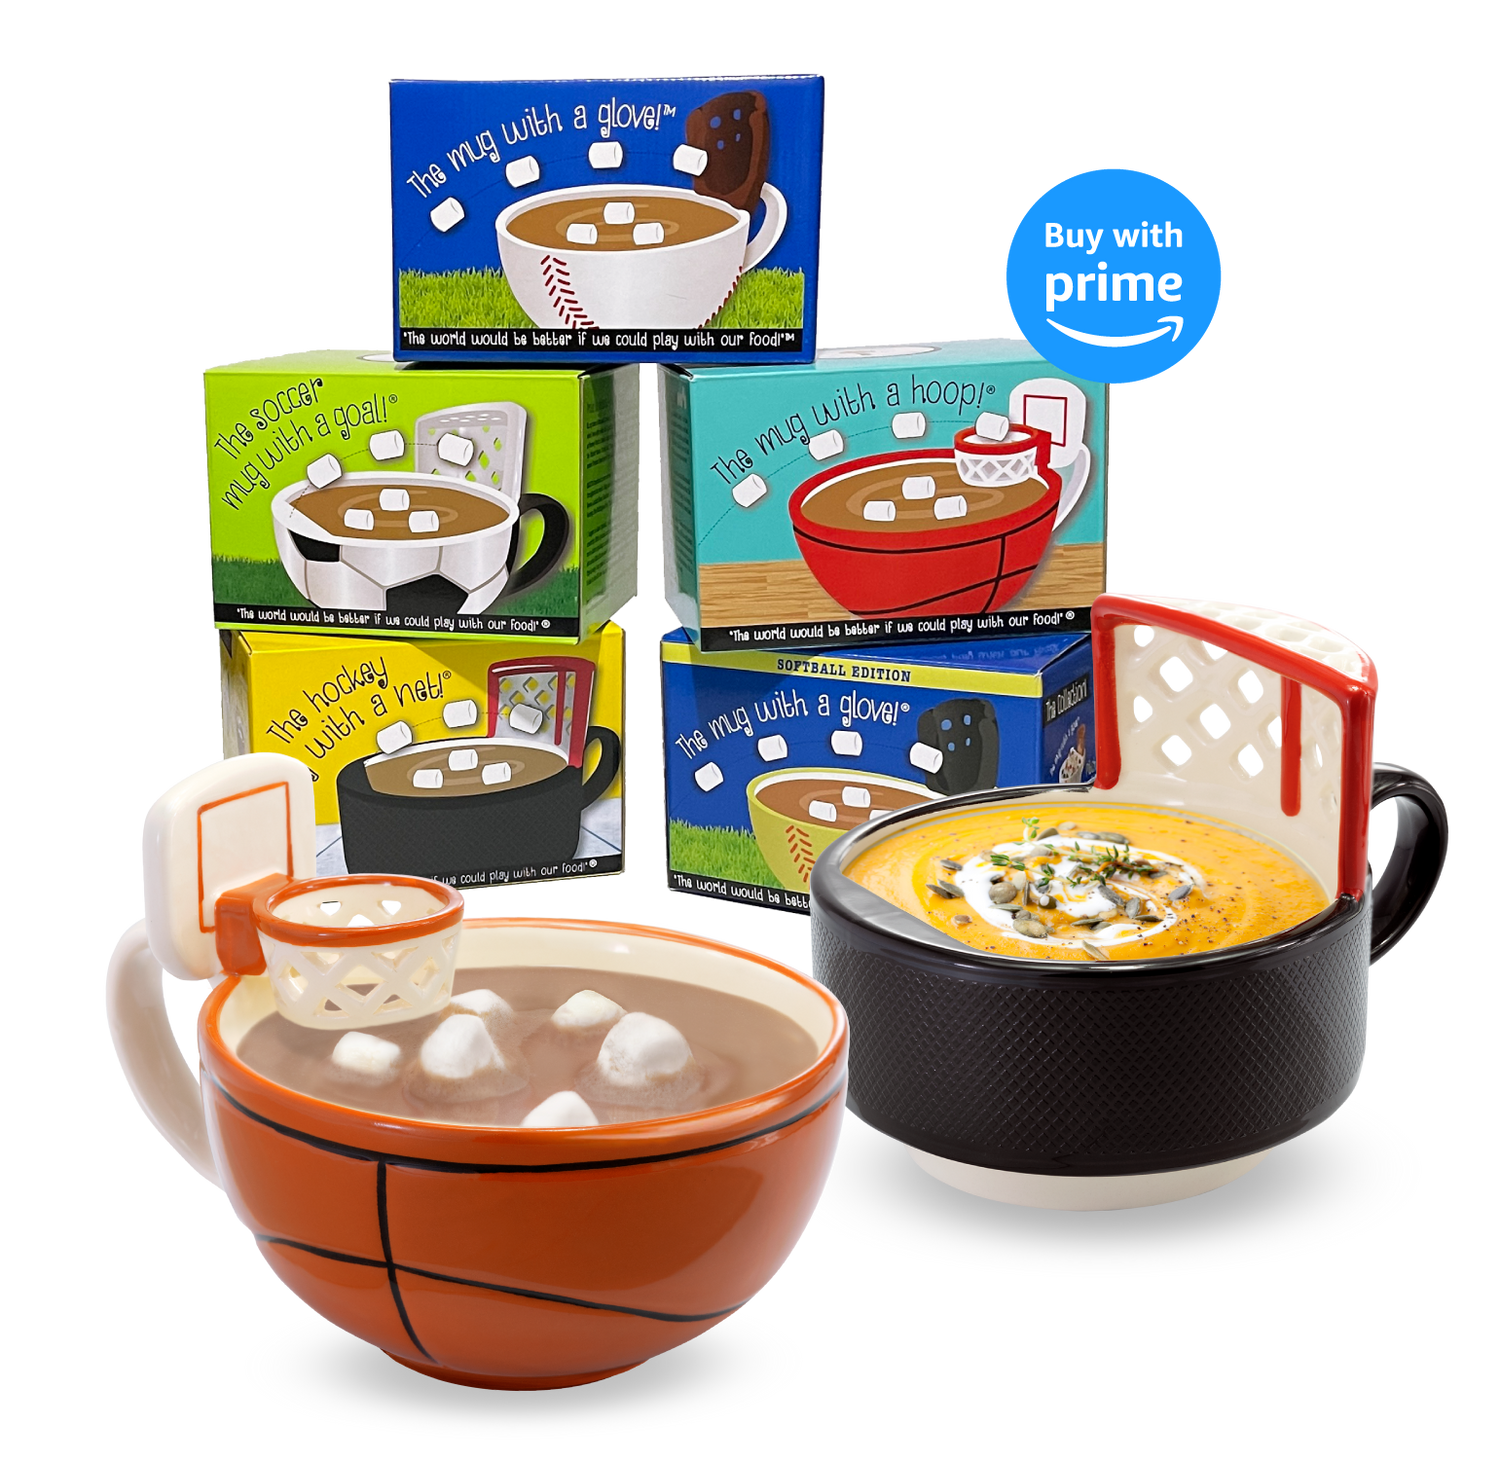 Sport mugs make great gifts. Play with your food with this original sports mug! The mug with a hoop, the mug with a glove, the football mug with a goal, the hockey mug with a net or the softball mug are all perfect for scoring marshmallows.